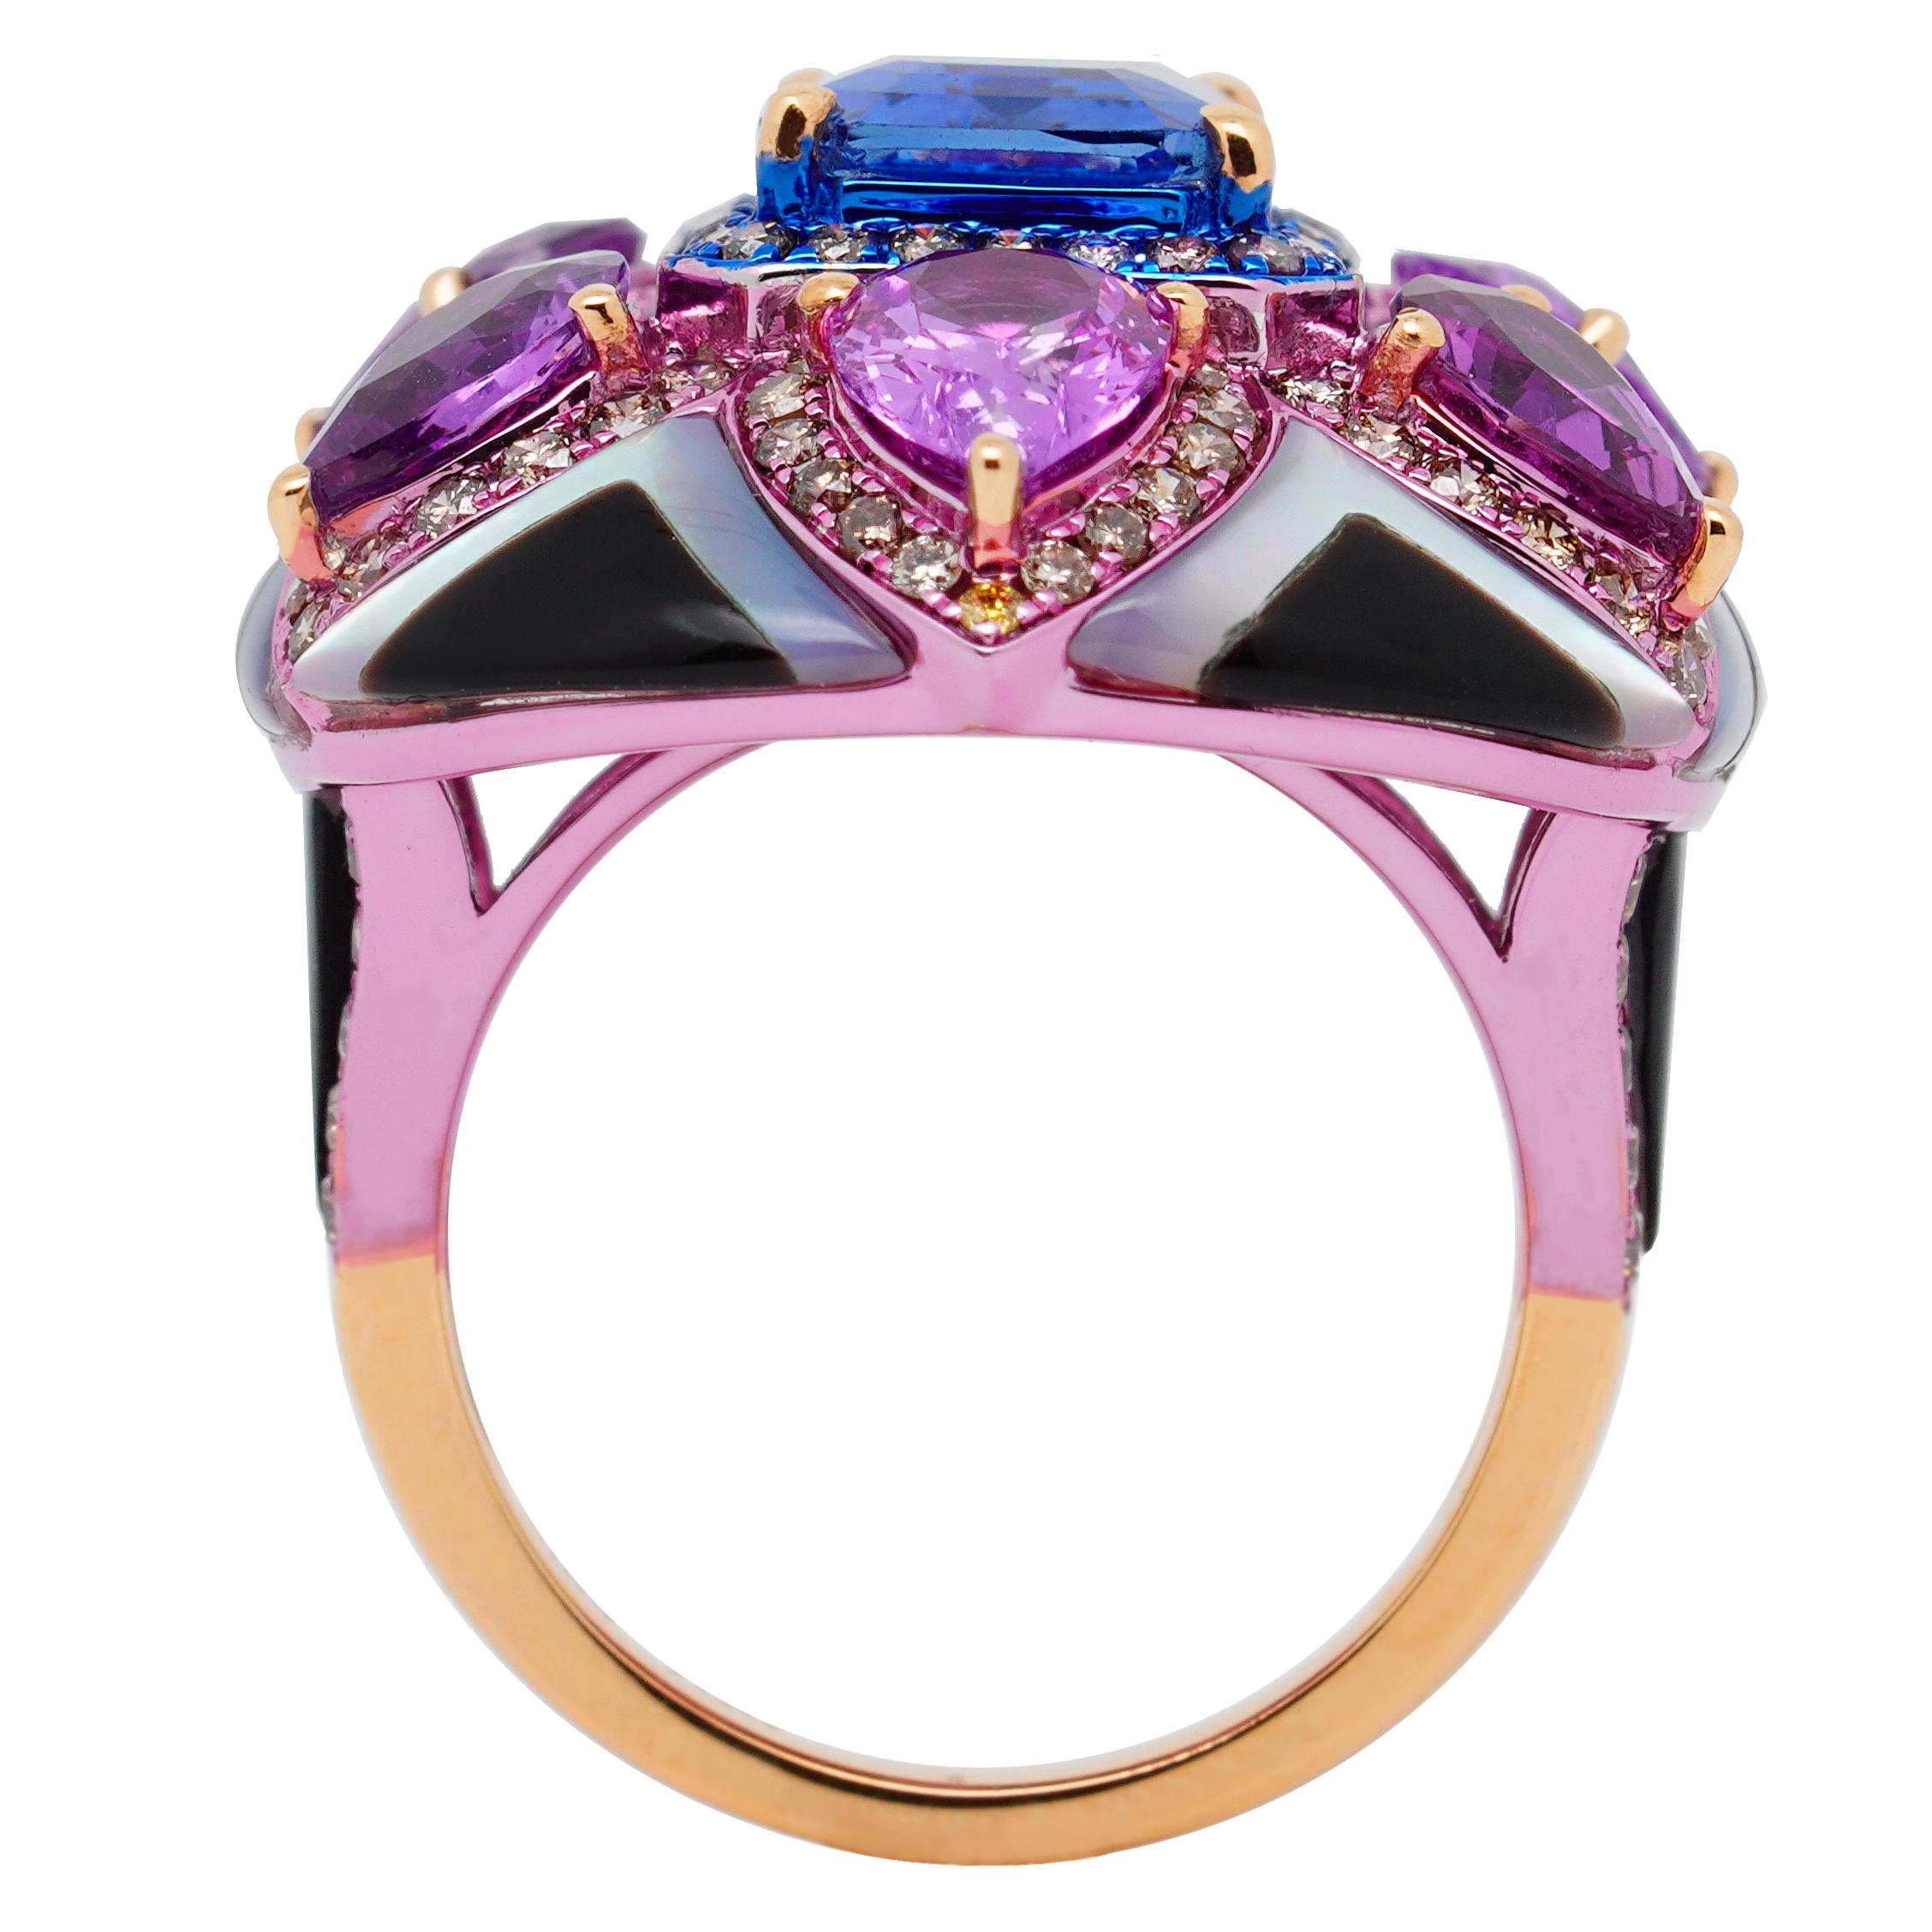 The Asiatic Lily Ring from 'The Poetry of Art Collection' by Austy Lee. Inspired by the form of Asiatic lilies originated from Japan, Austy created this eye-catching piece using Sri Lankan Blue Sapphire, Sri Lankan Unheated Purple Sapphires, Mother